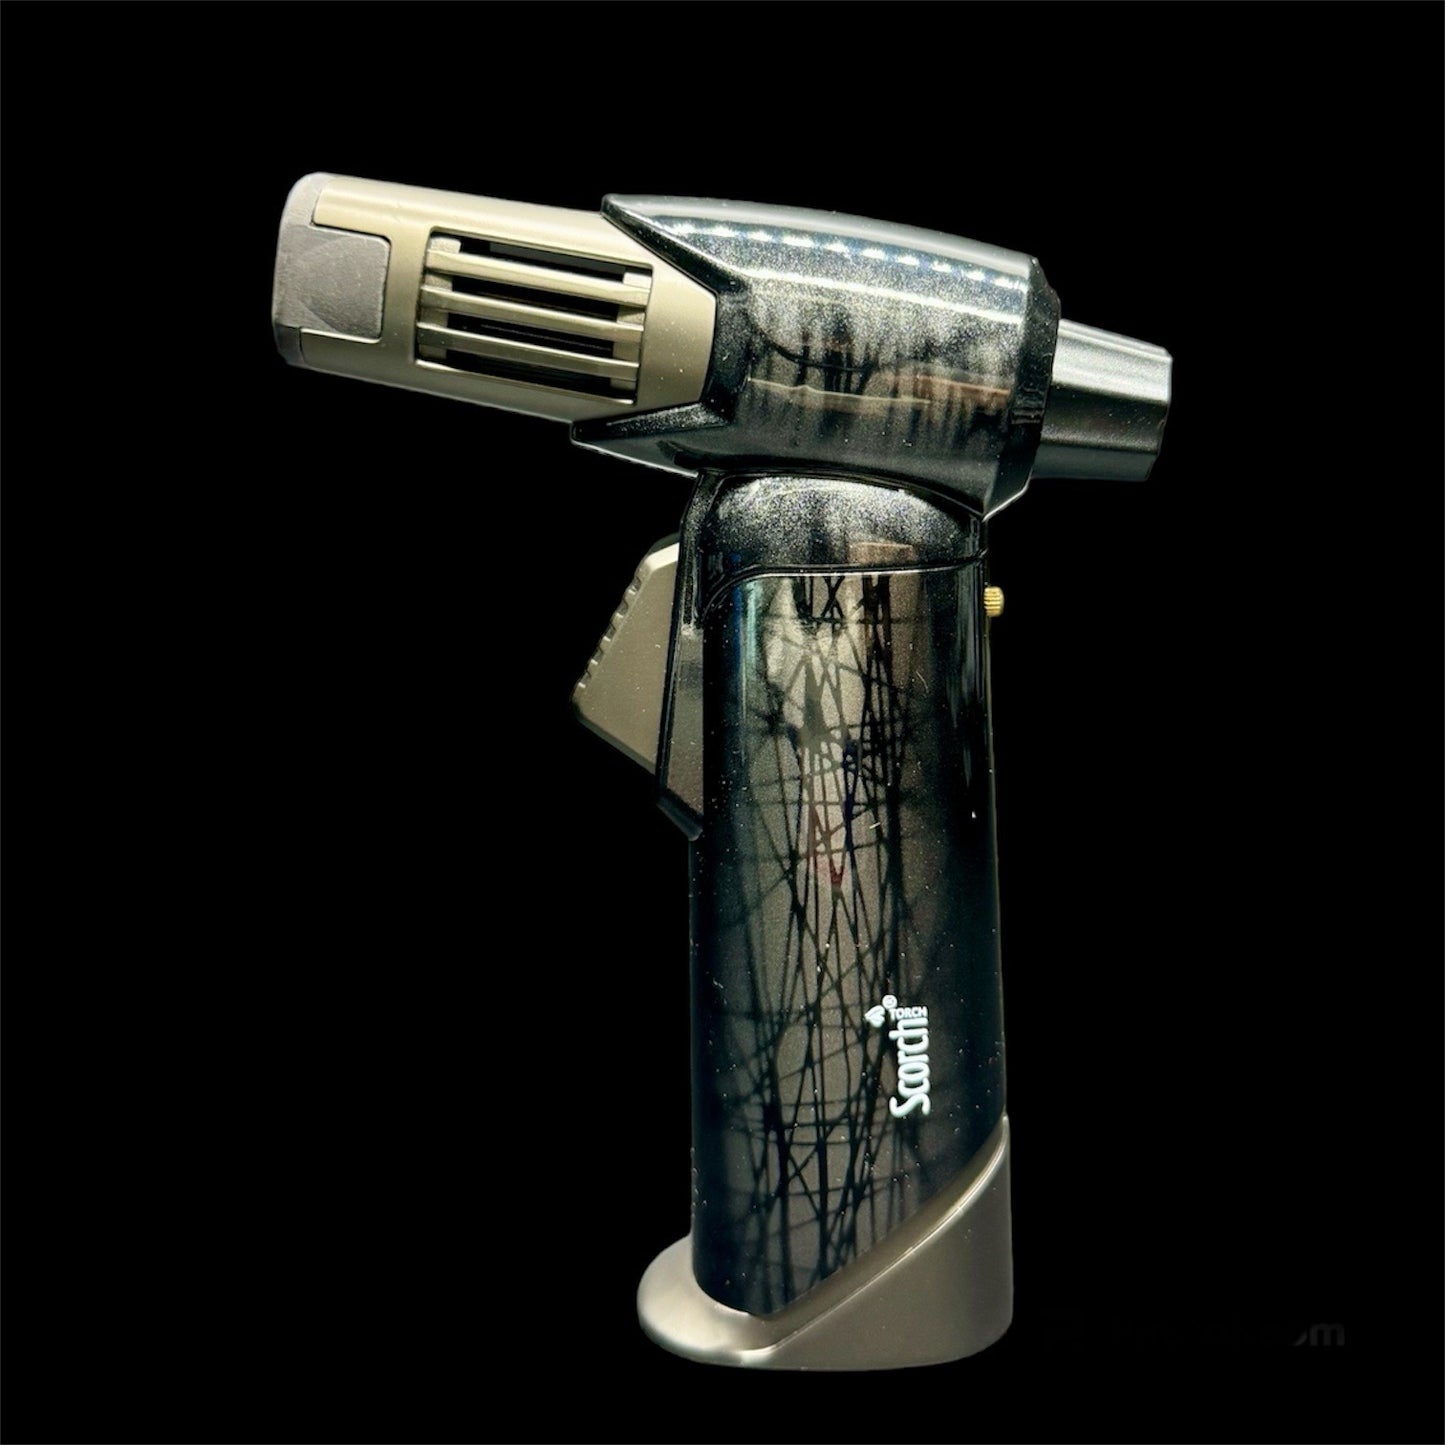 scorch torch lighters 61732 black gray color 